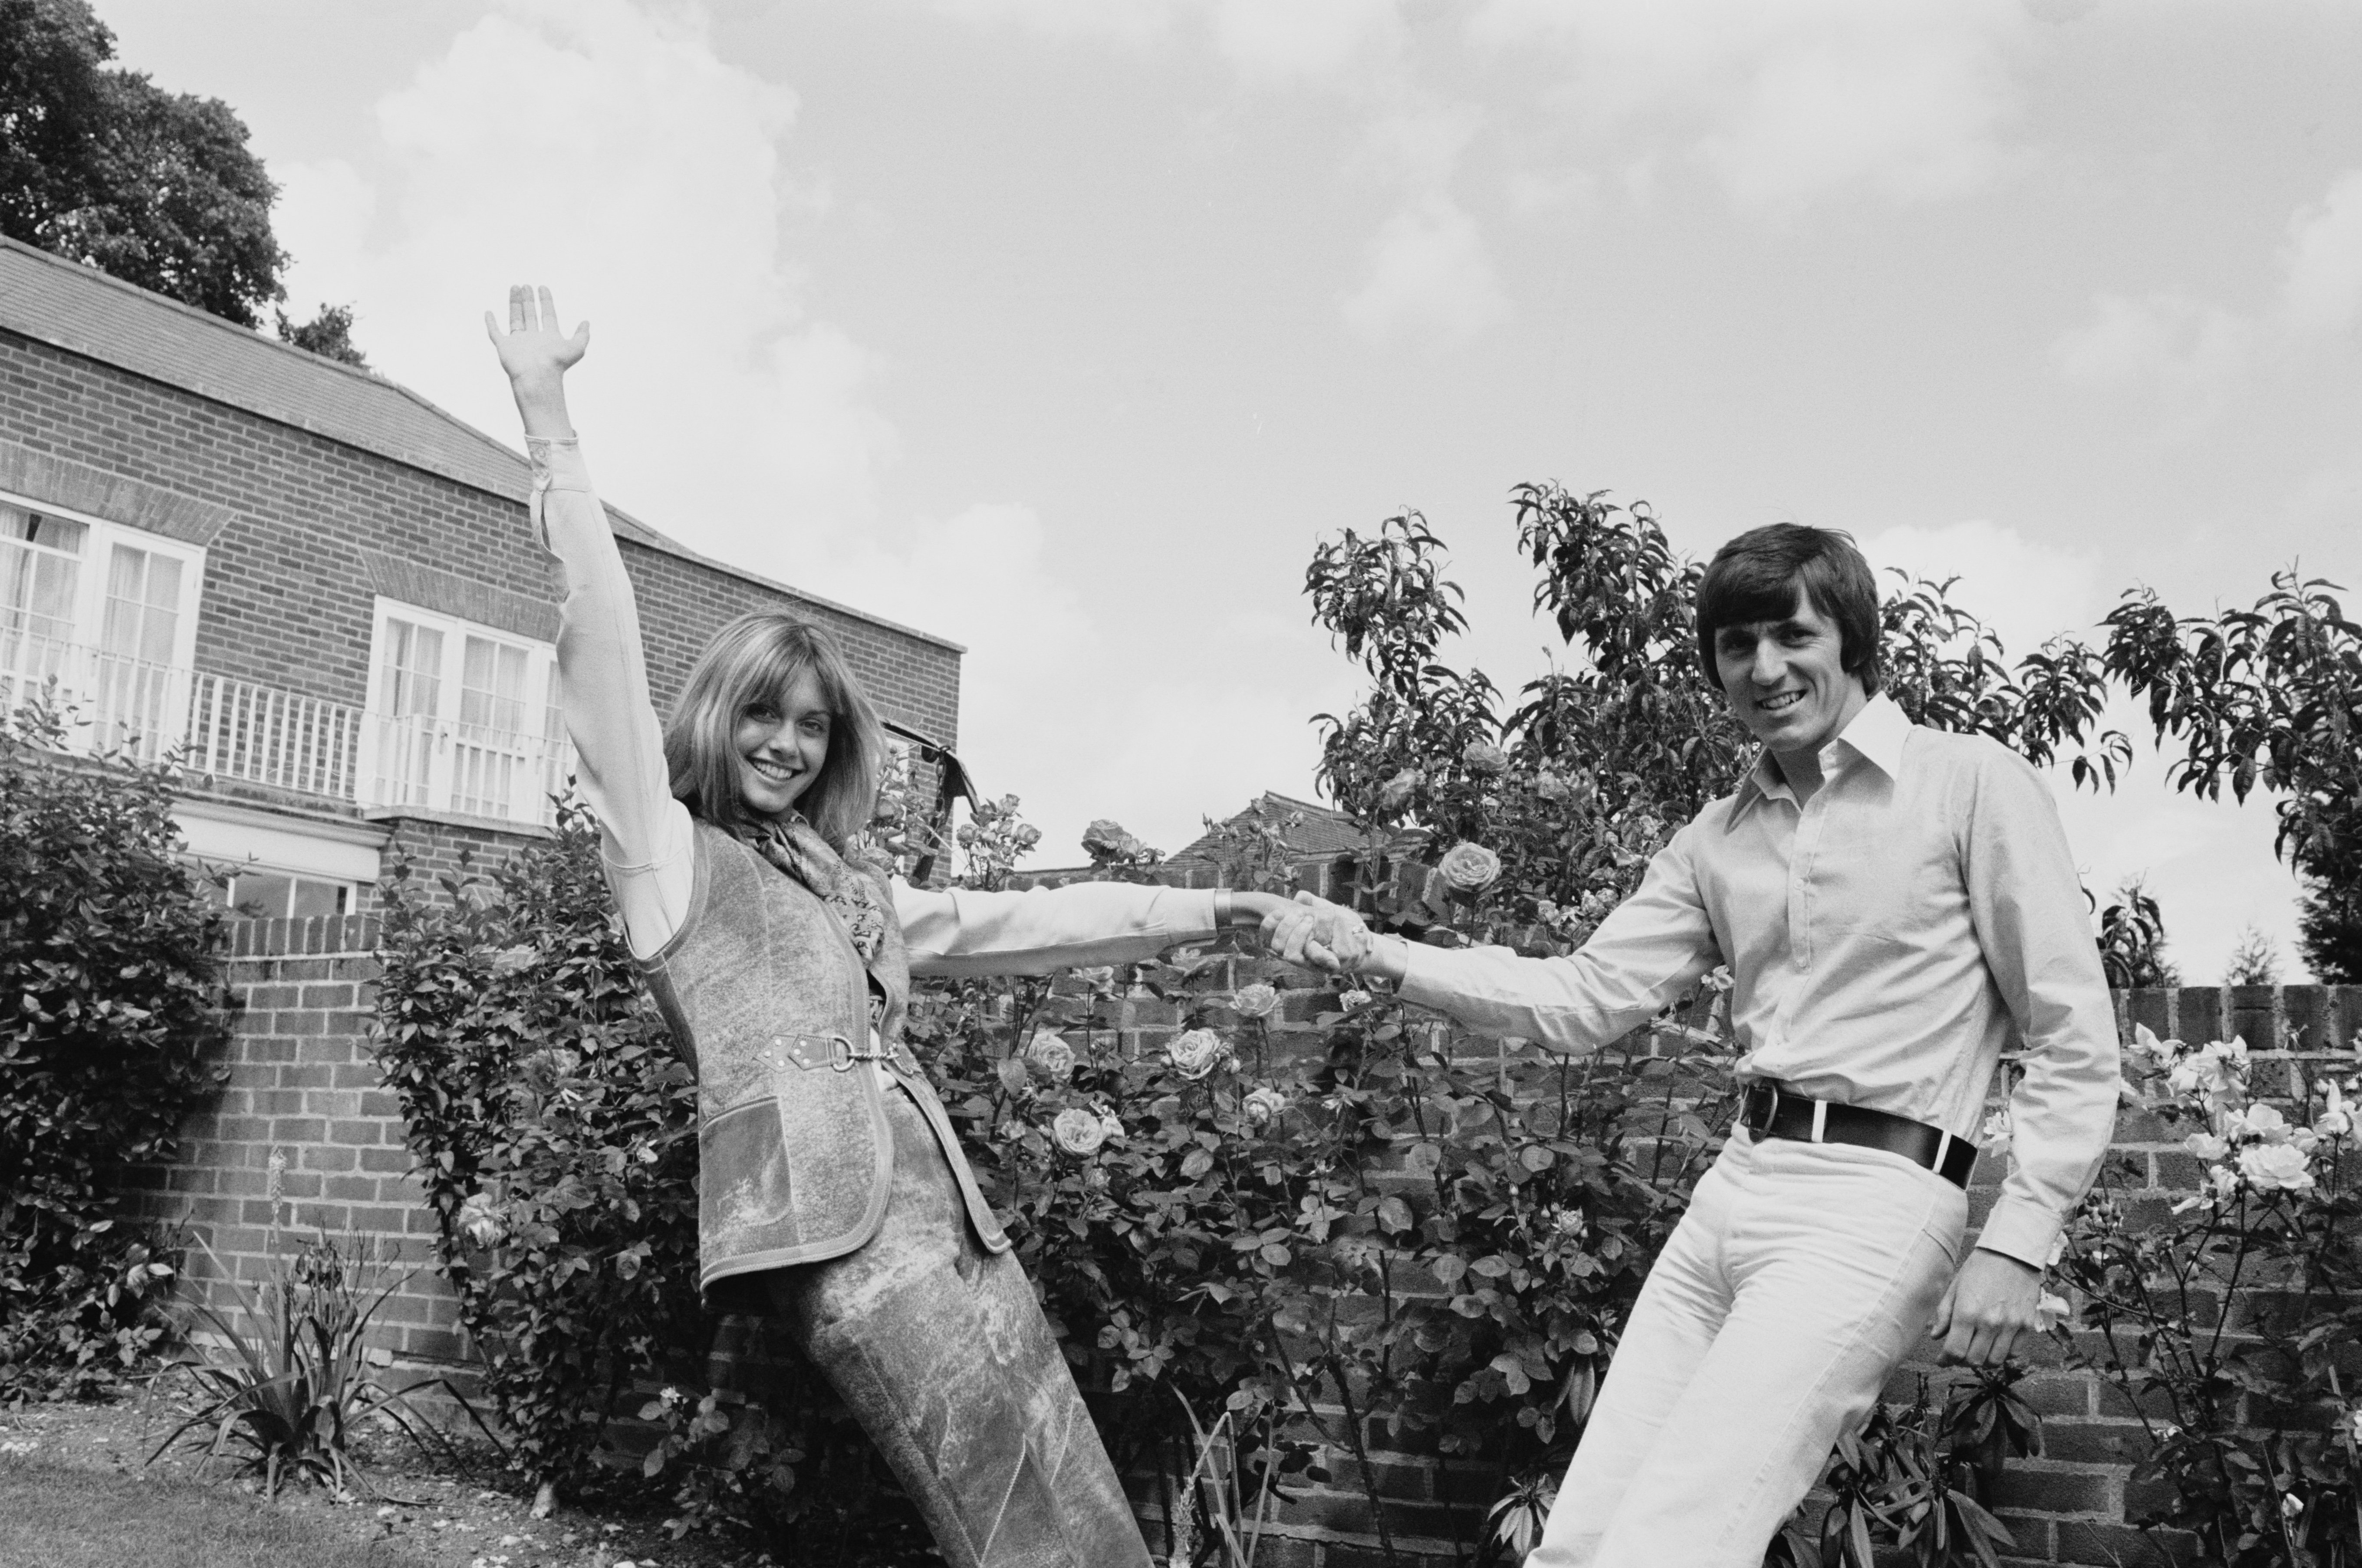 Olivia Newton-John with her ex-fiance Bruce Welch of The Shadows, at their former home in Hertforshire in 1970 | Source: Getty Images